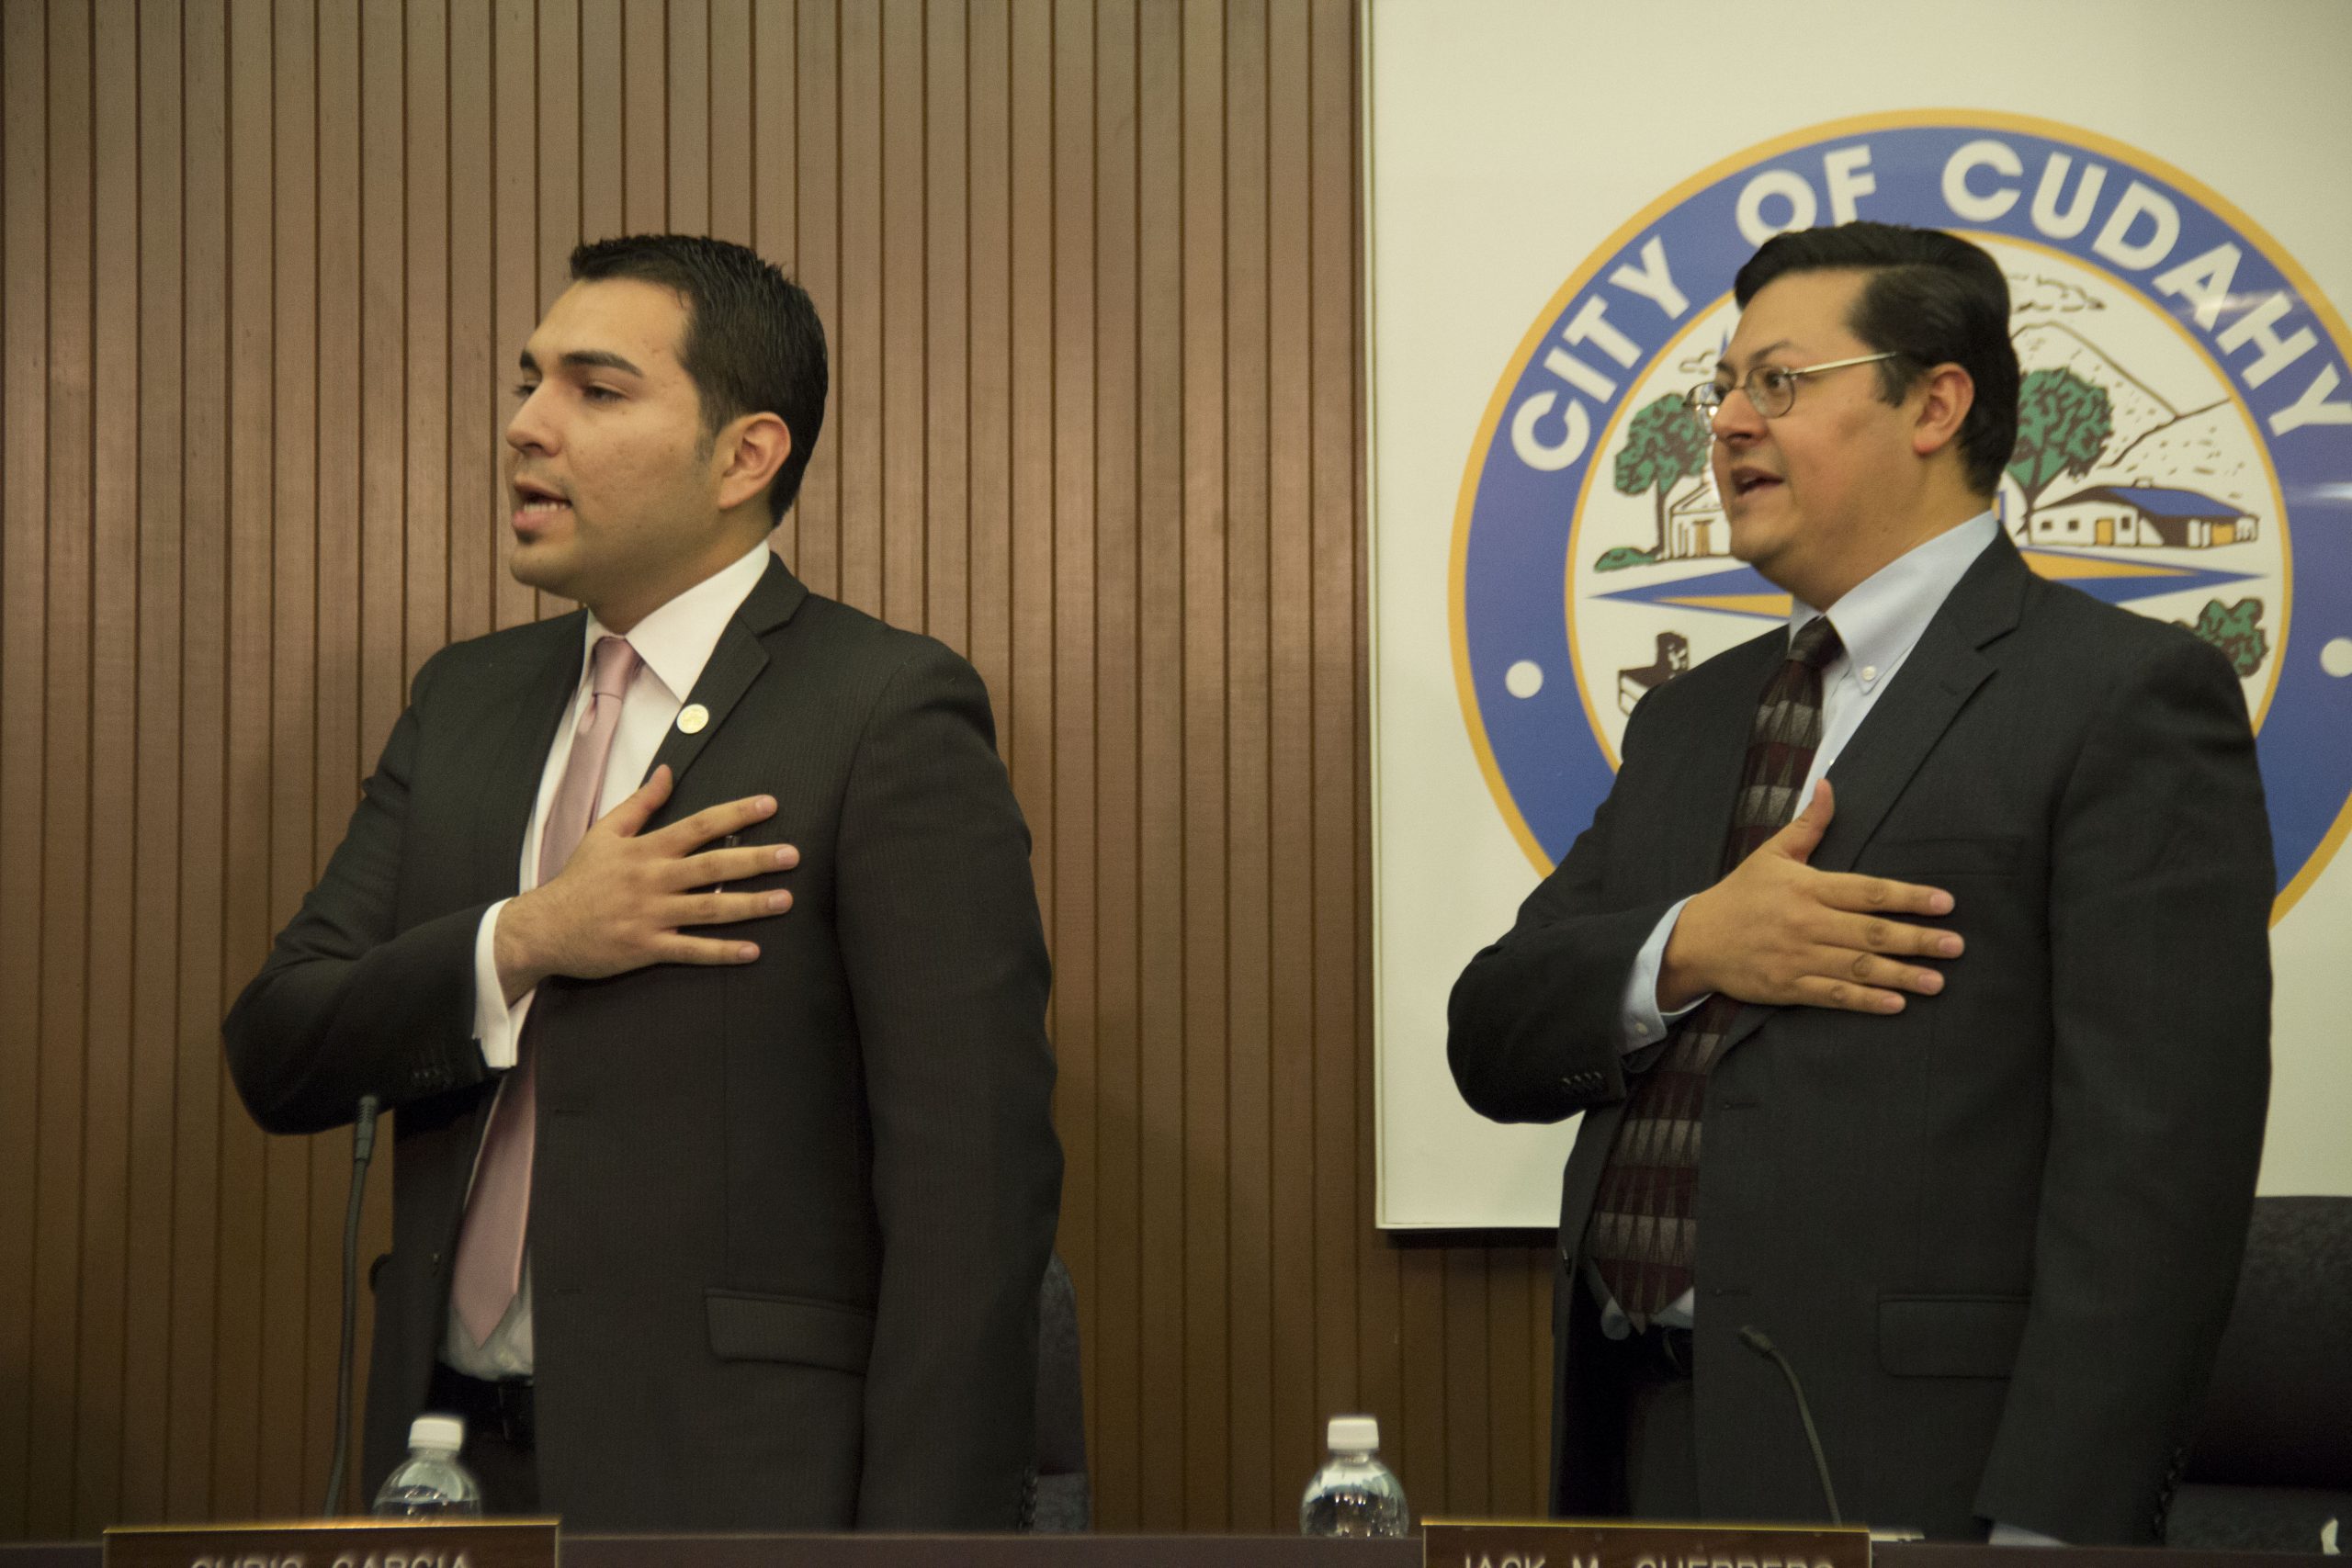 California Controller Slams Past Spending Practices by Cudahy Officials